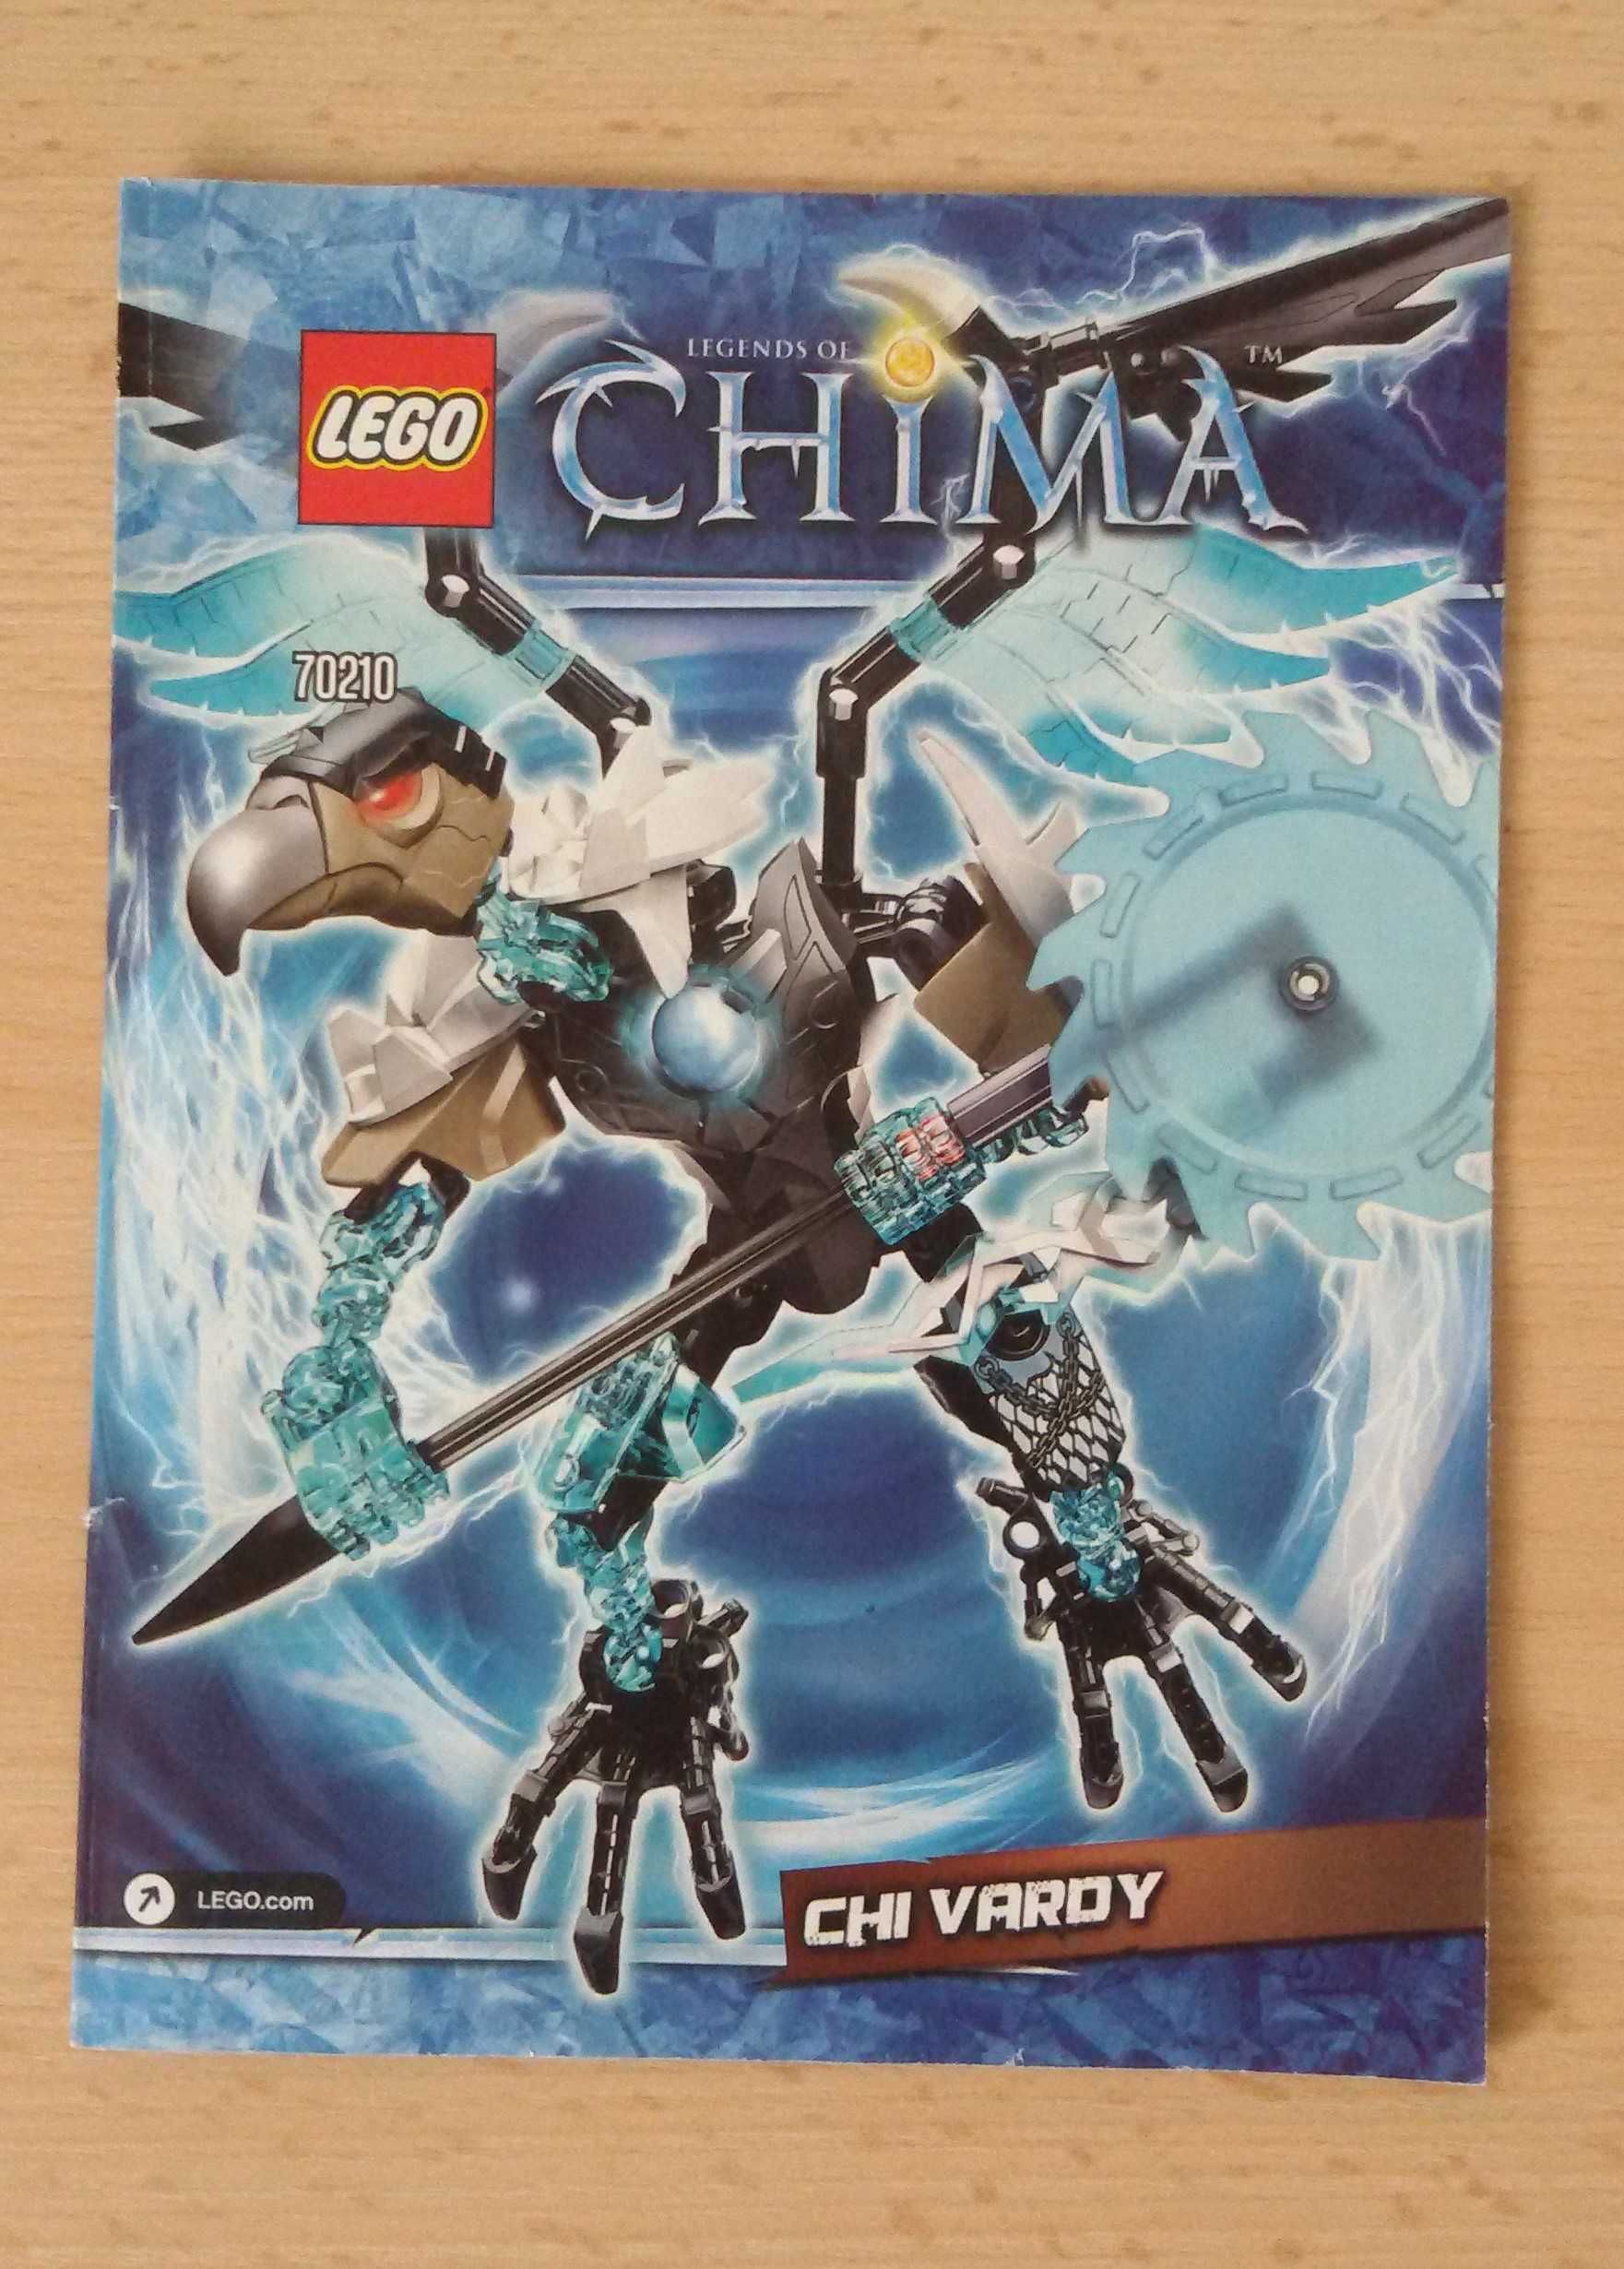 LEGO Chima 70210 Legends of Chima - CHI Vardy